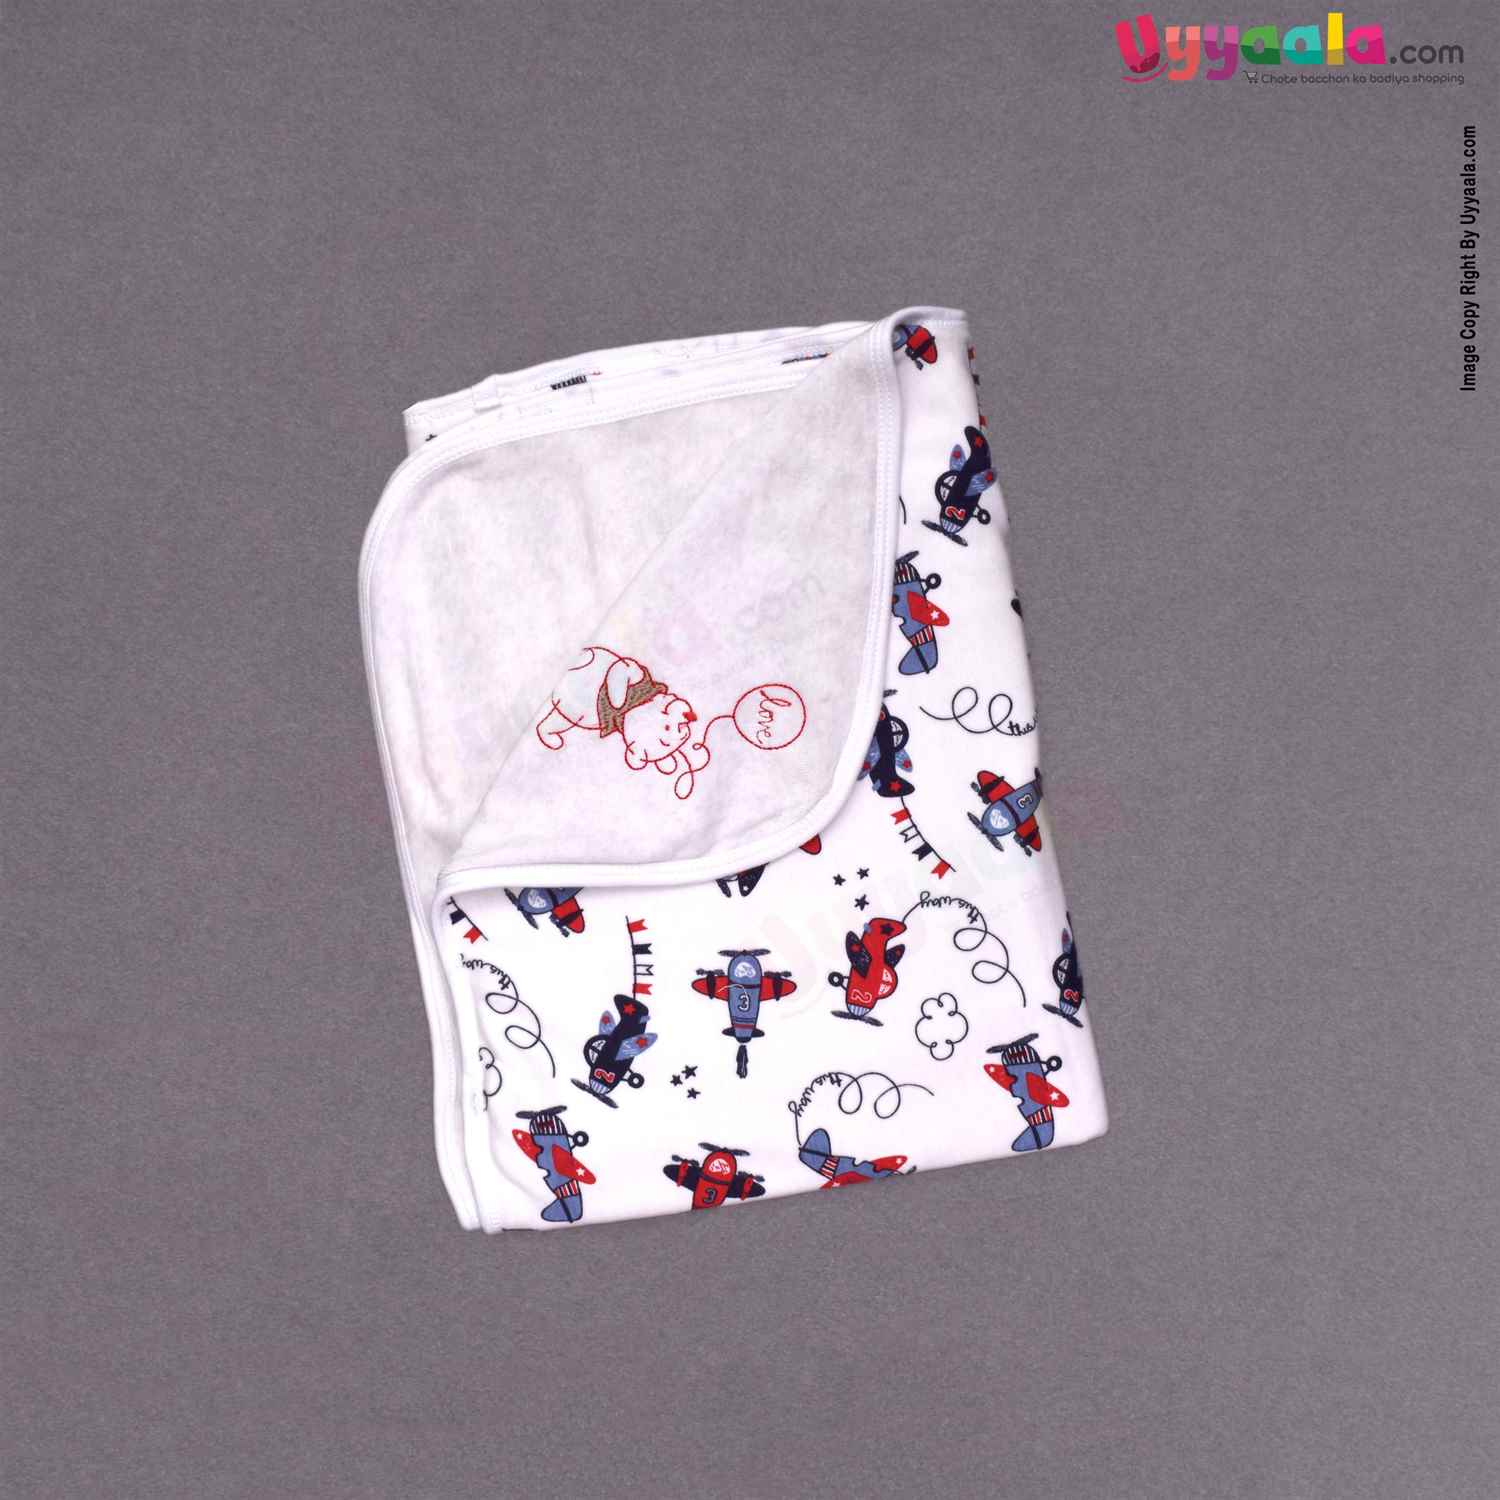 Dual layered Terry Cotton Hooded Baby Towel with Teddy Bear & Aeroplane Prints - 0+m, Size (94*65cm), White & Multicolor